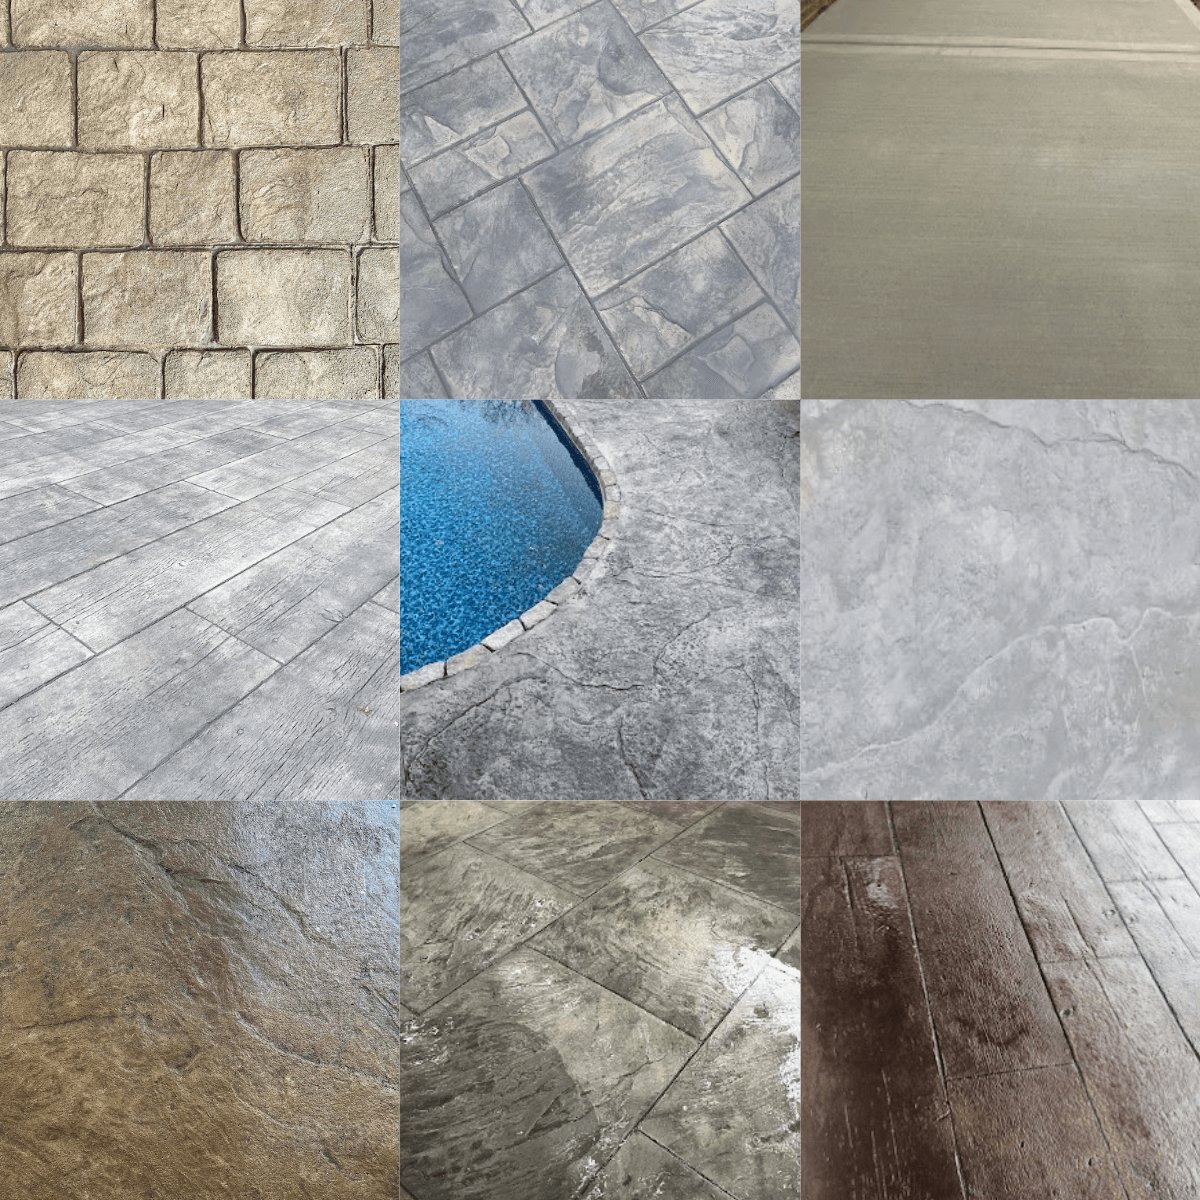 Different concrete finishes and patterns